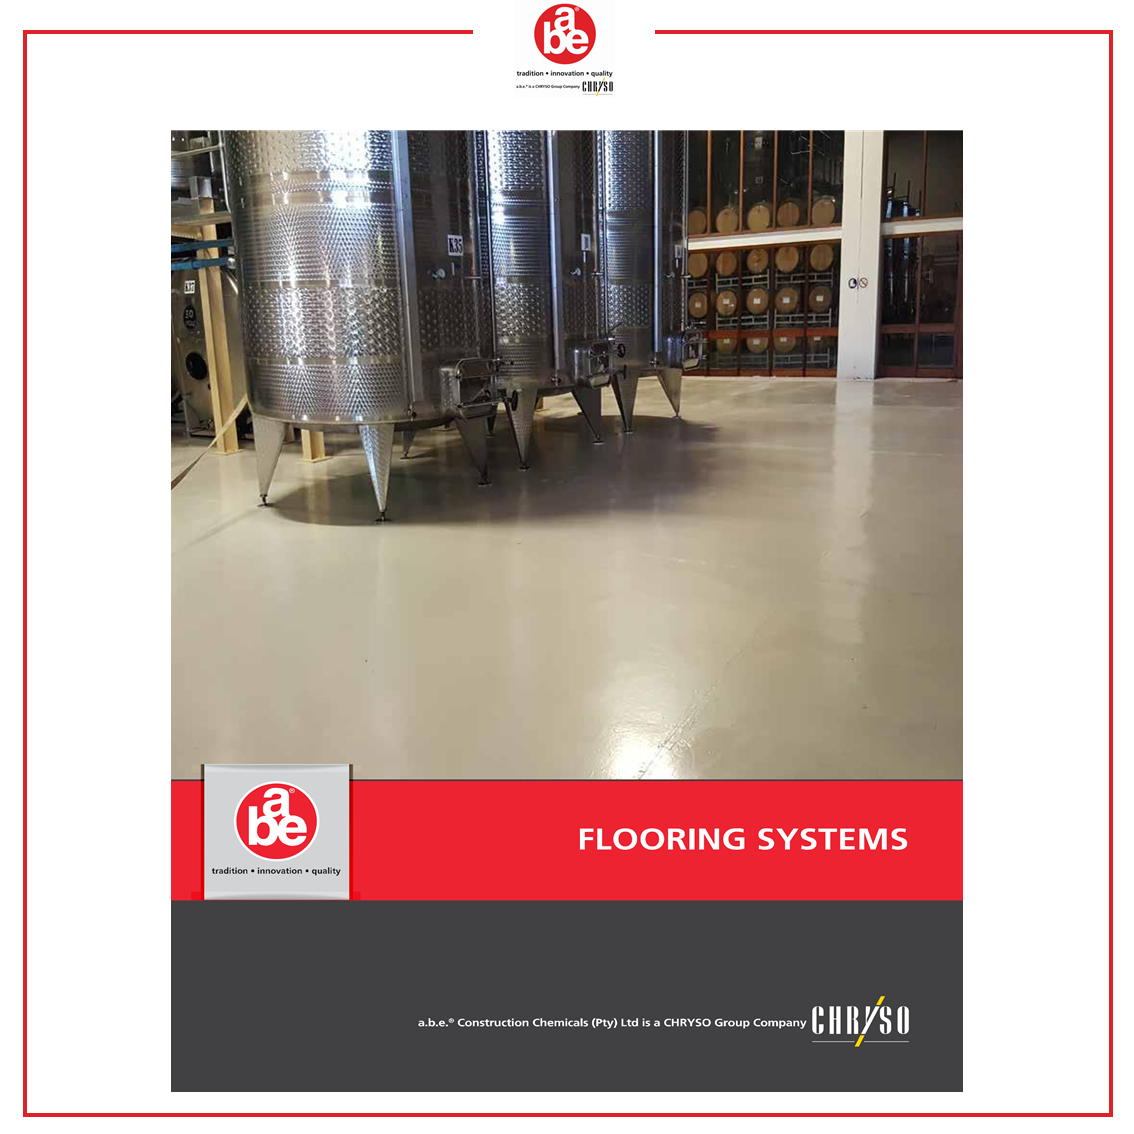 ABE - Flooring Systems Brochure Catalogue